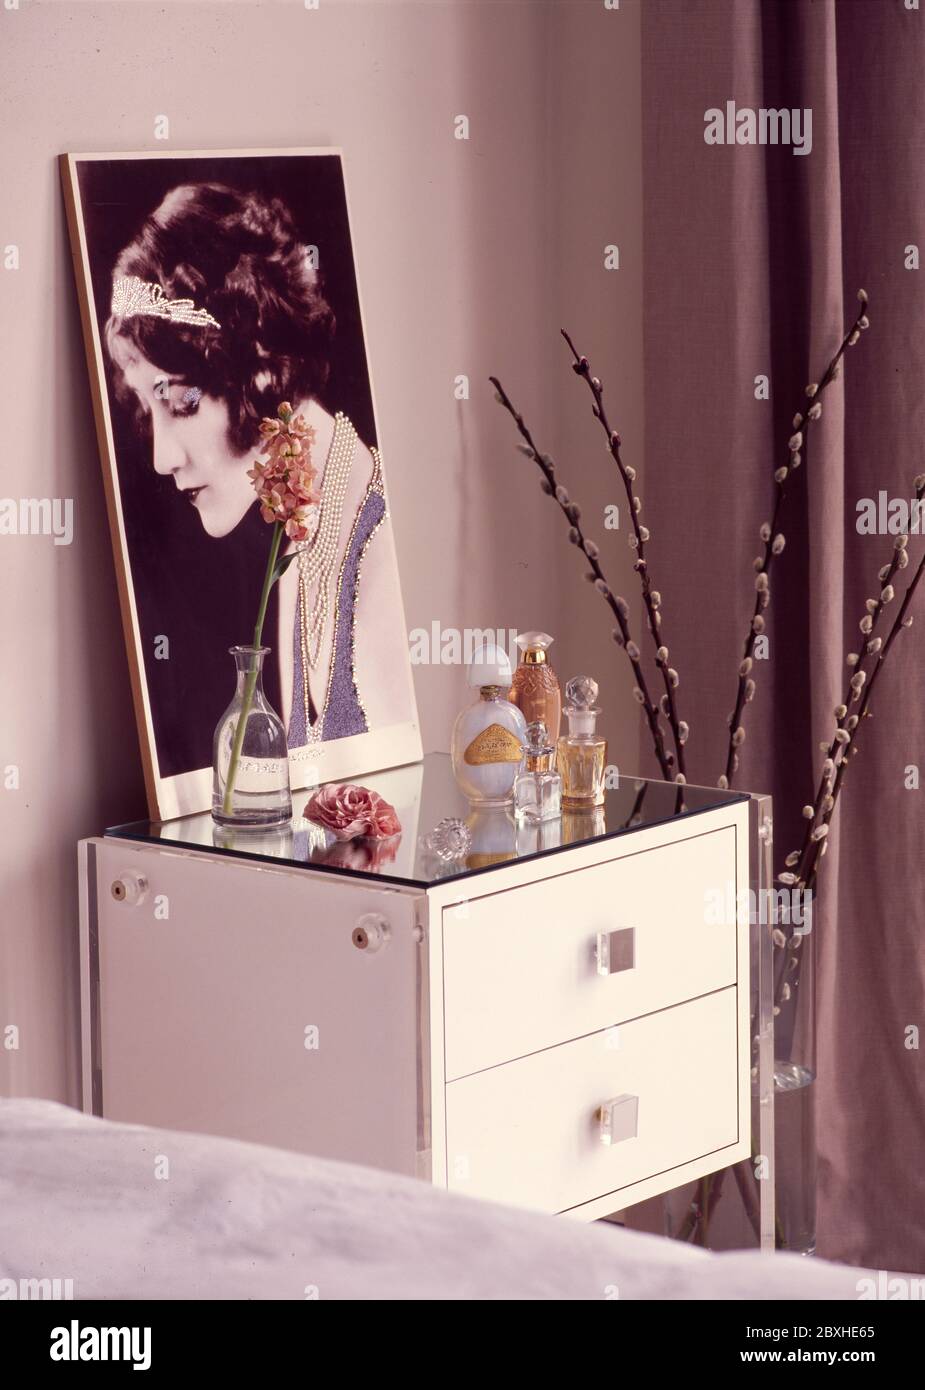 Bedside table with mirrored surface, large pramed photograph and collection of perfume bottles Stock Photo